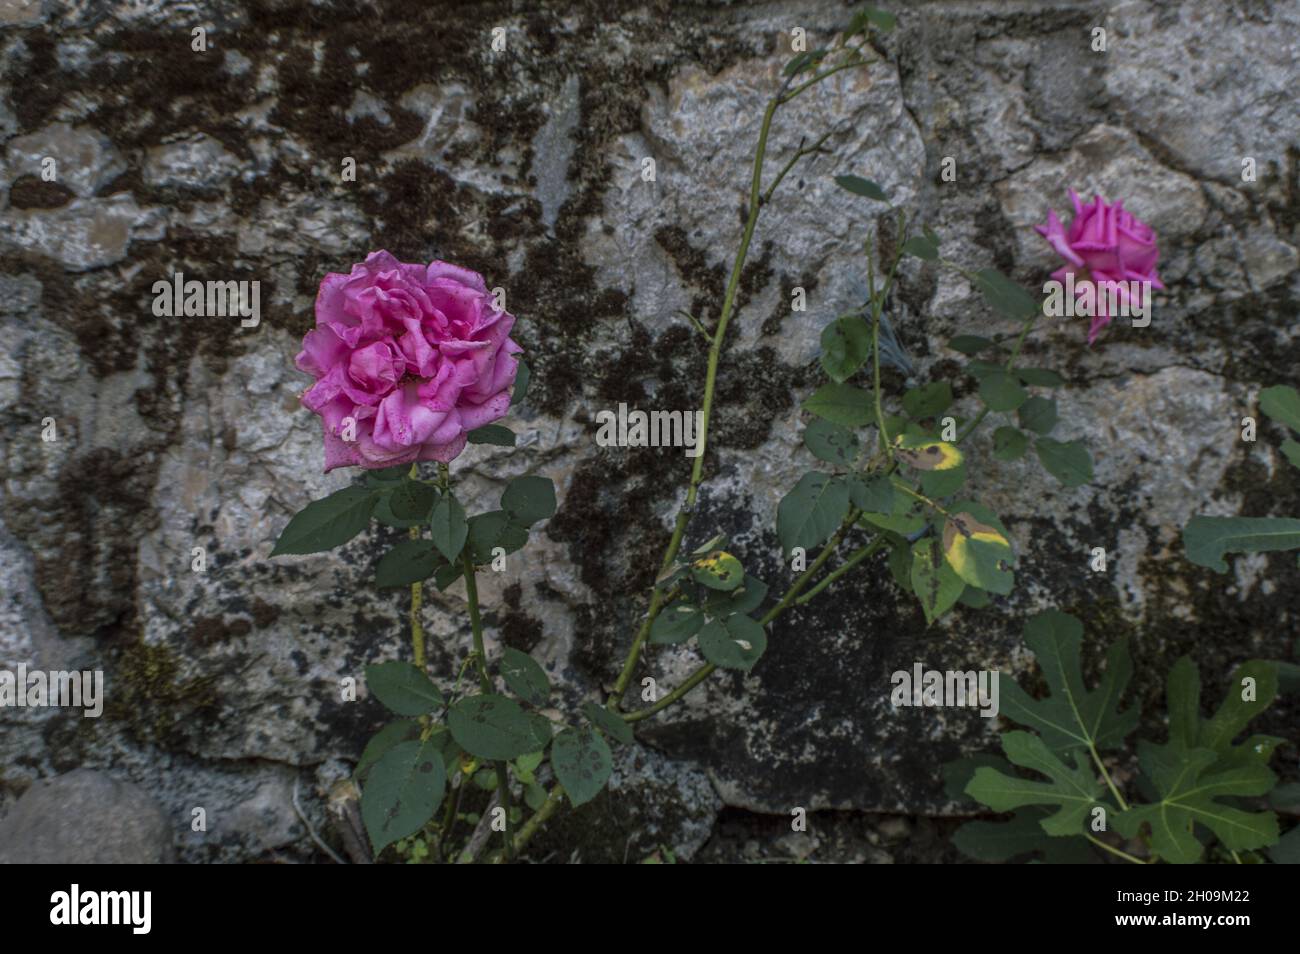 Blooming rose flowers growing beside the mossy stone wall Stock Photo